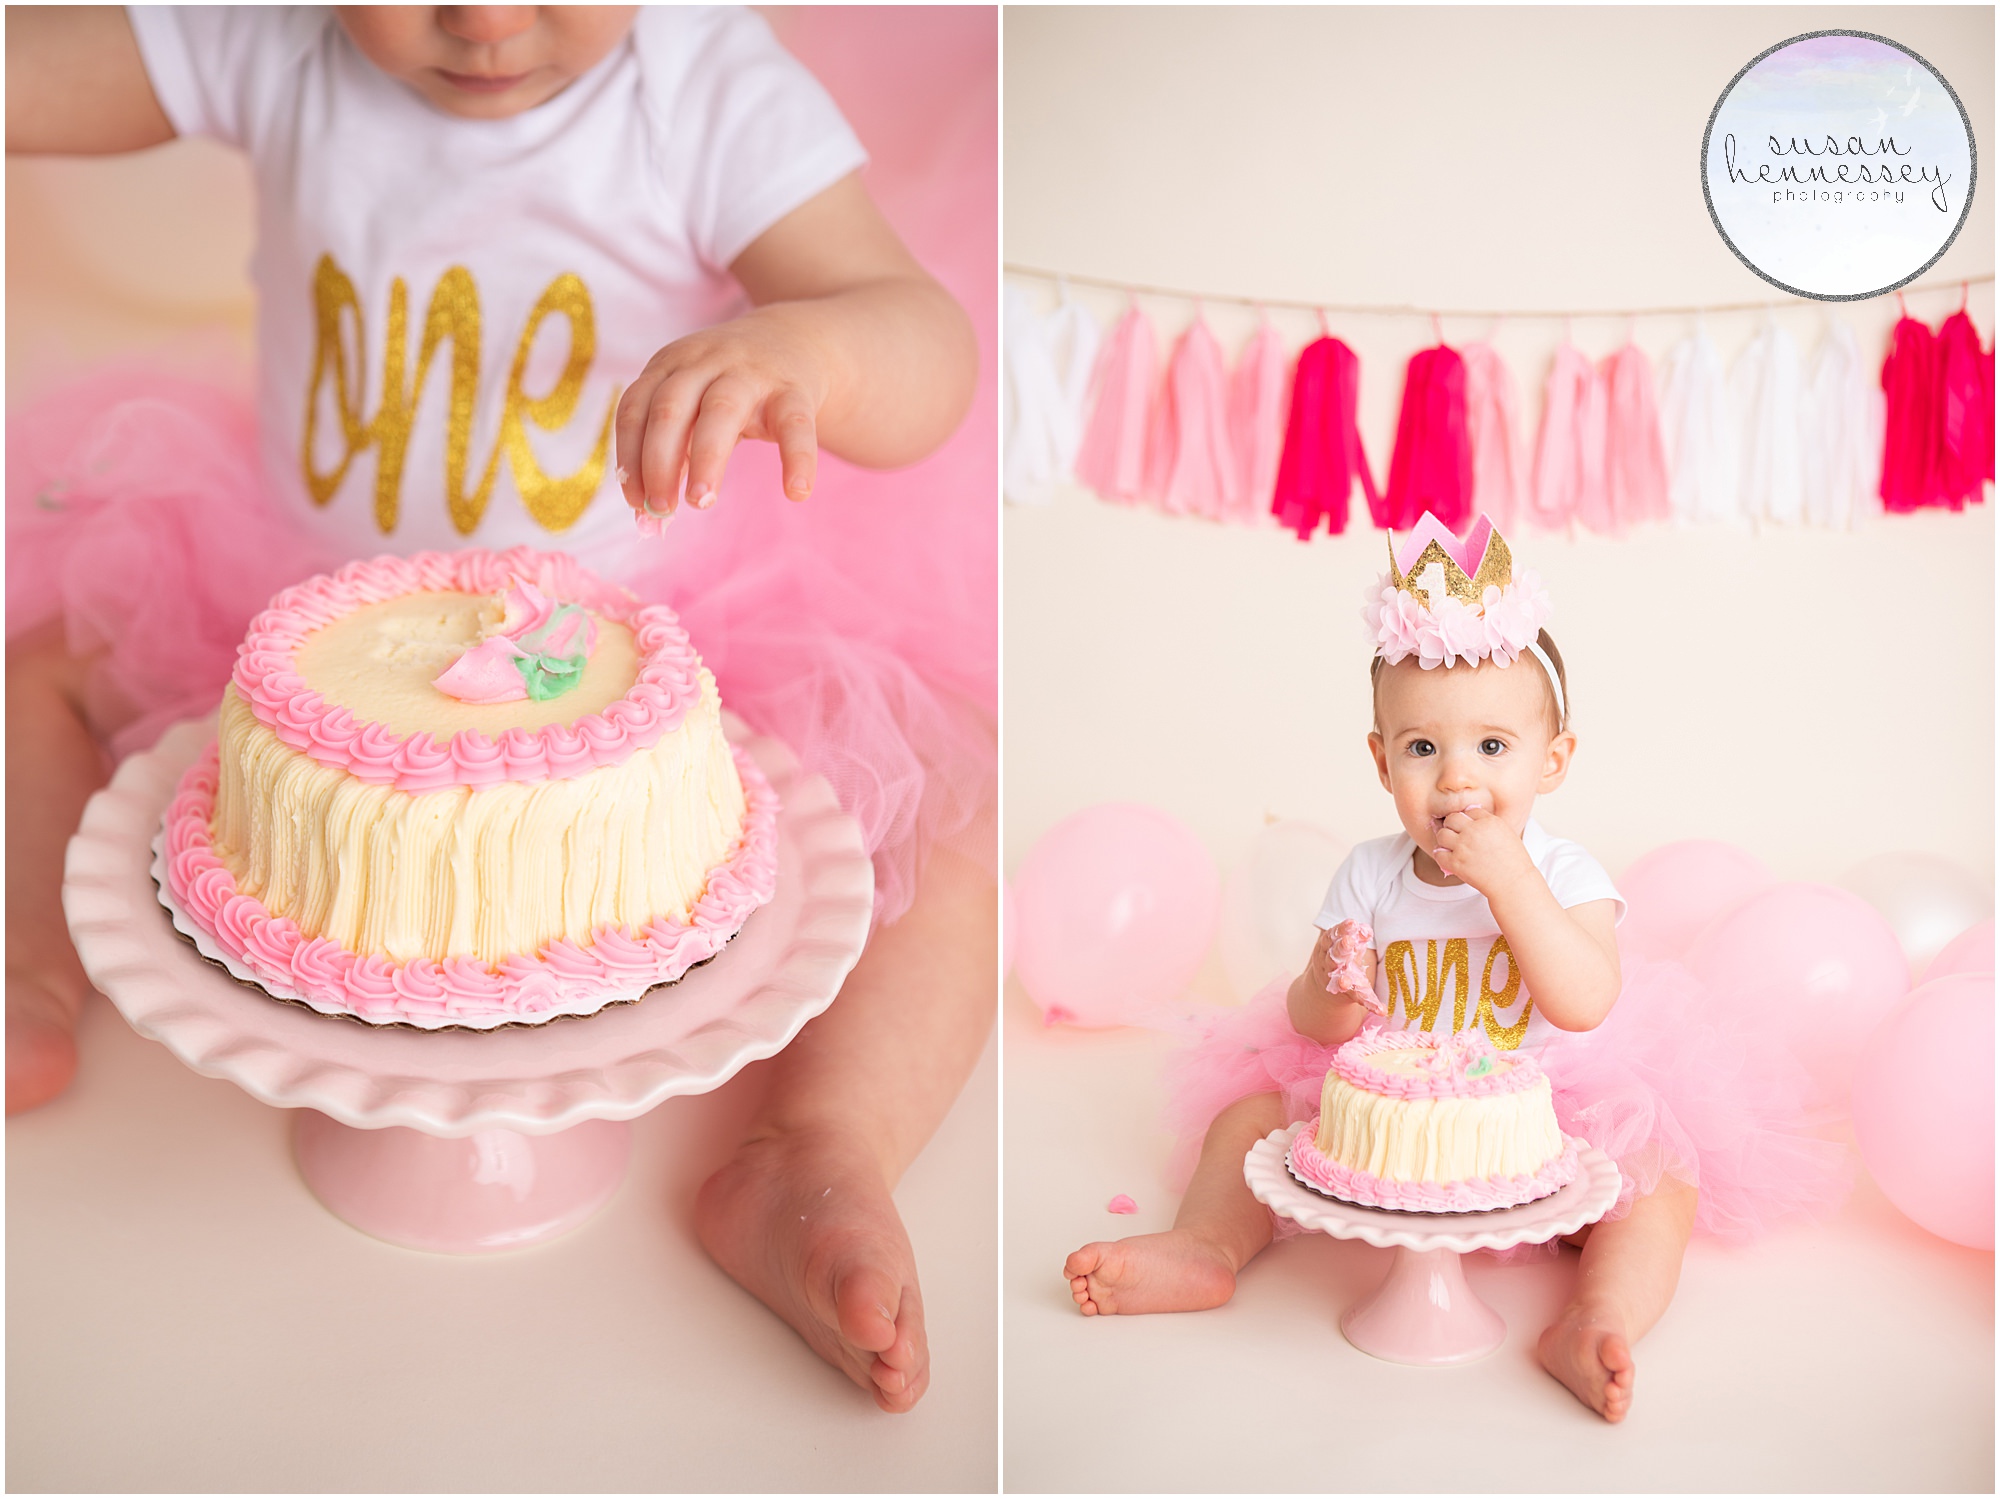 Norah had a pink and white themed cake smash photo session